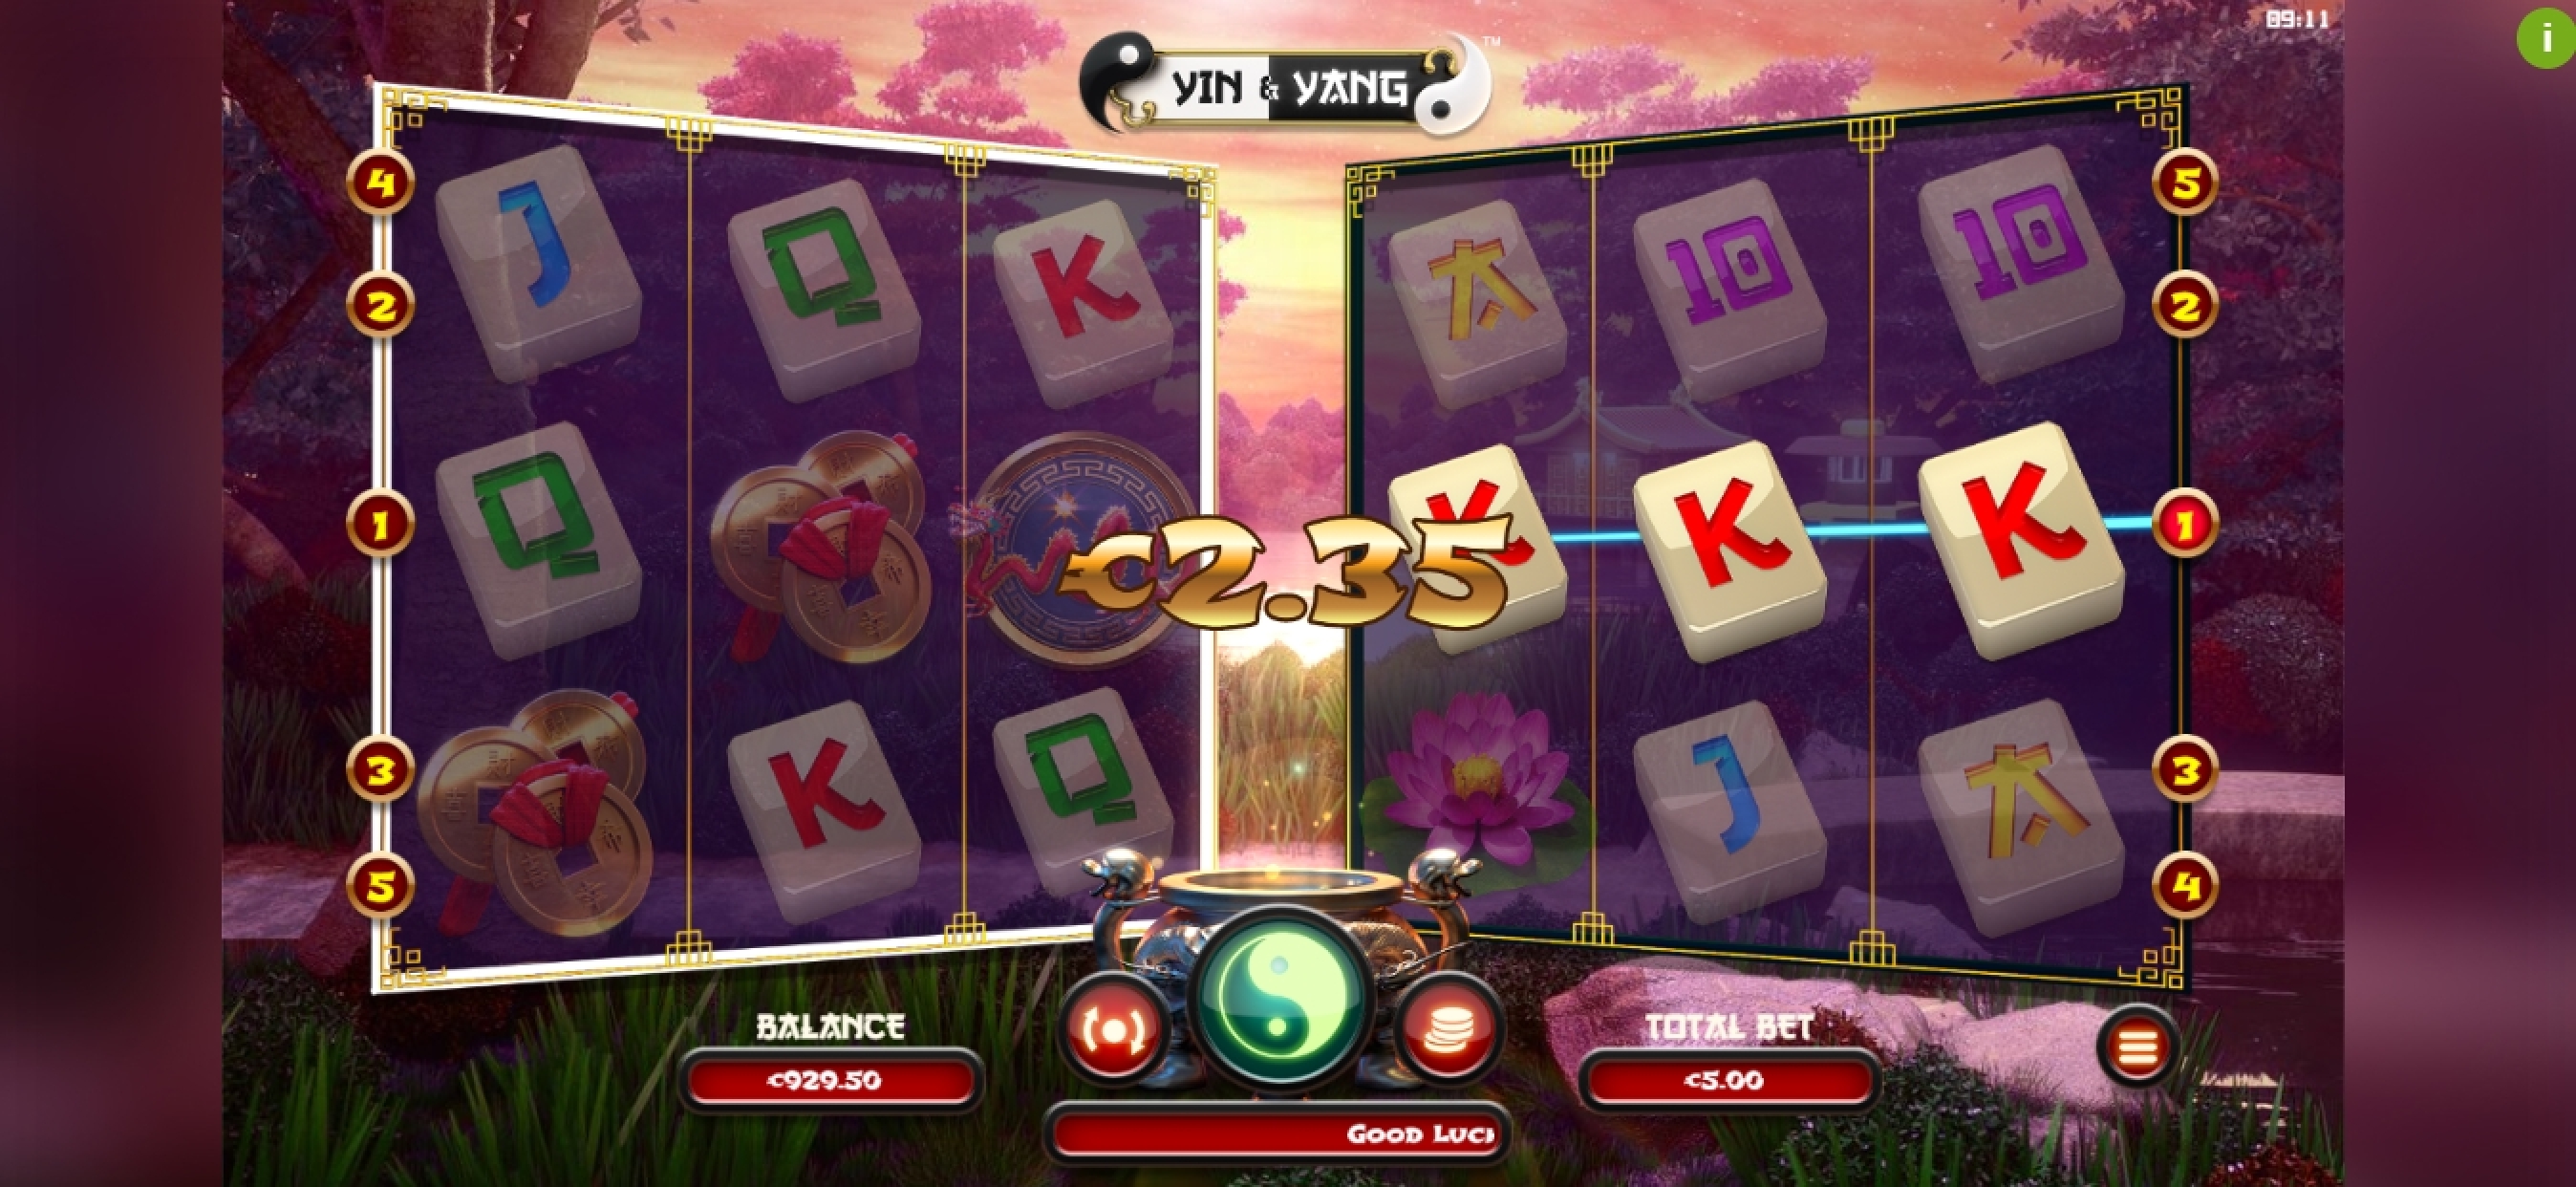 Win Money in Yin & Yang Free Slot Game by BB Games